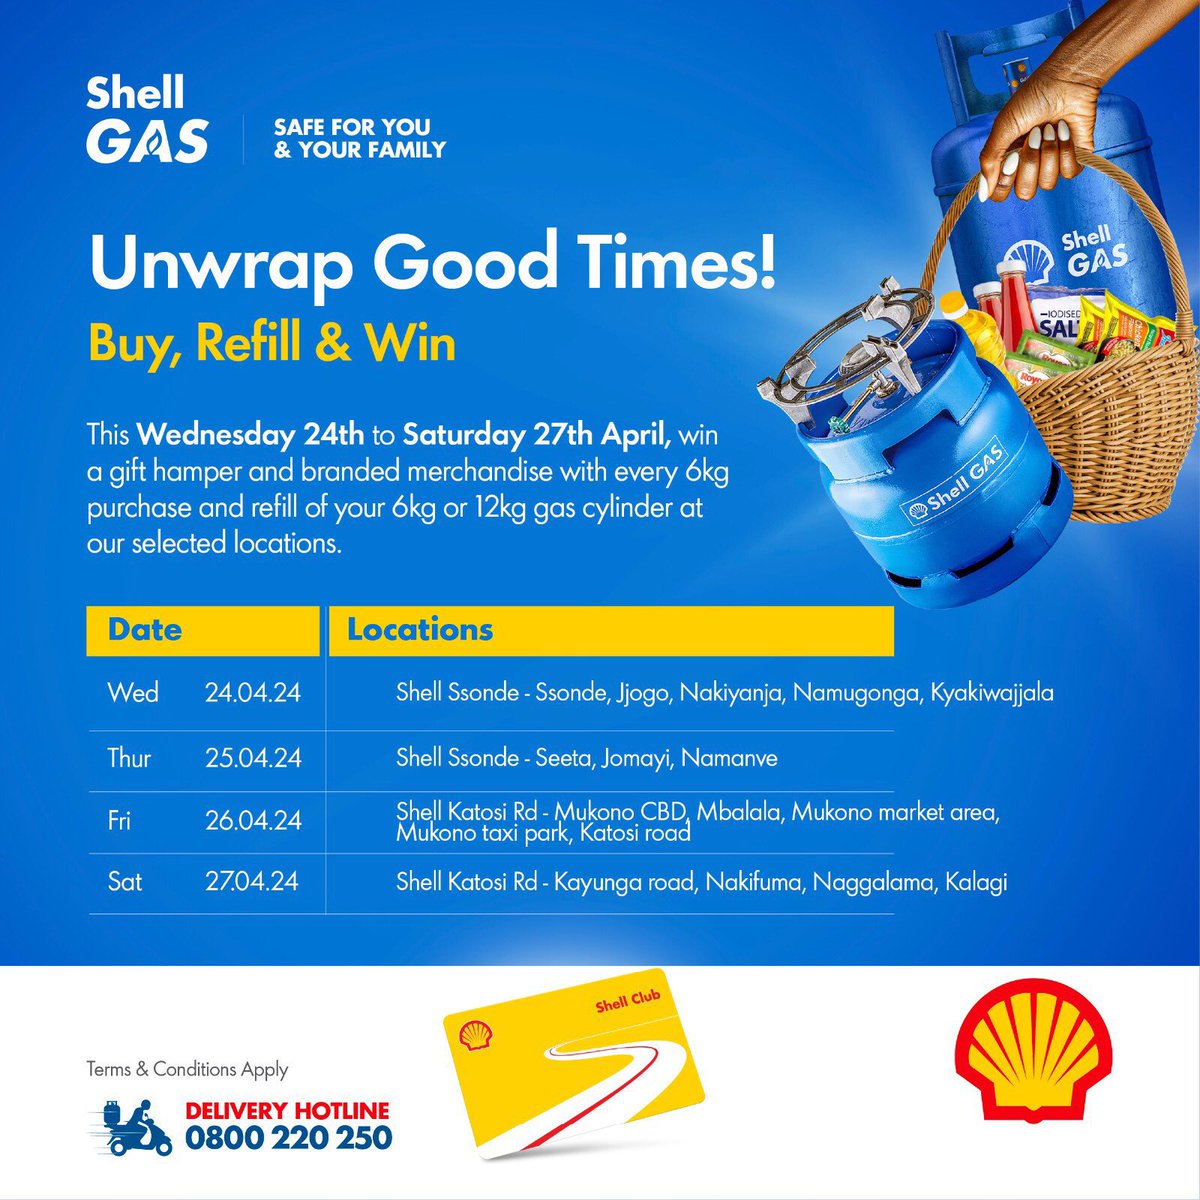 Are you along Shell Katosi Road? Come for some gift hampers and other goodies at Shell Katosi as you buy or refill your Shell Gas cylinders #ShellGasBuyRefillWin